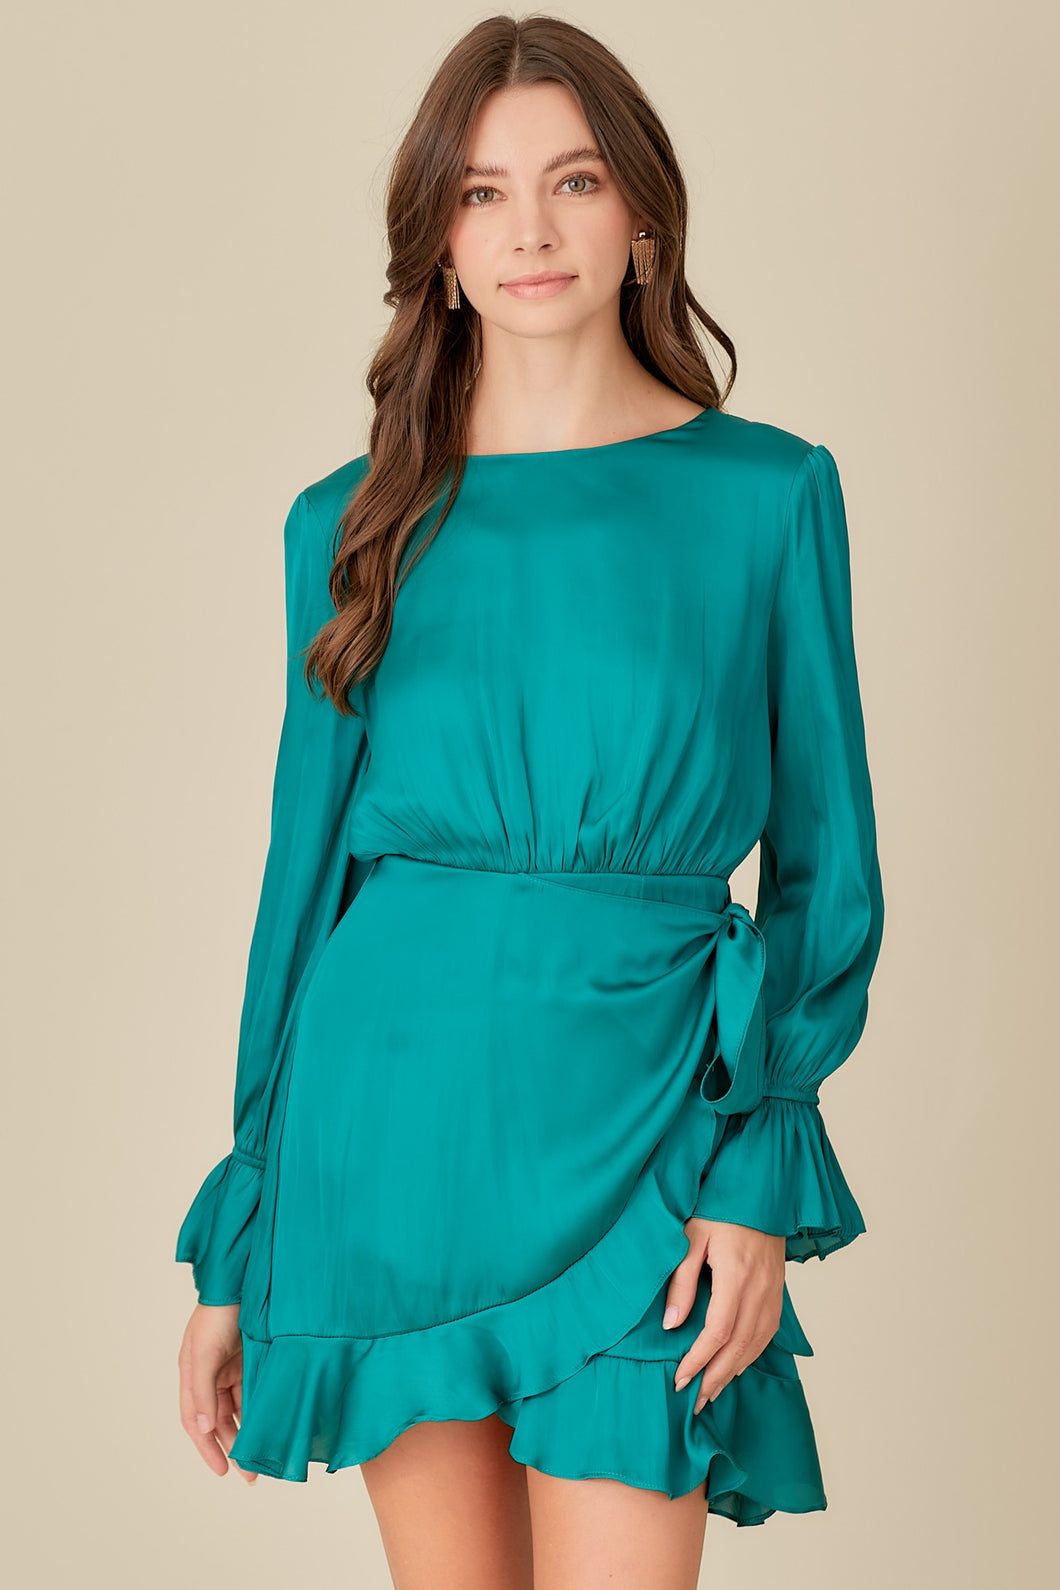 Crazy About Teal Dress